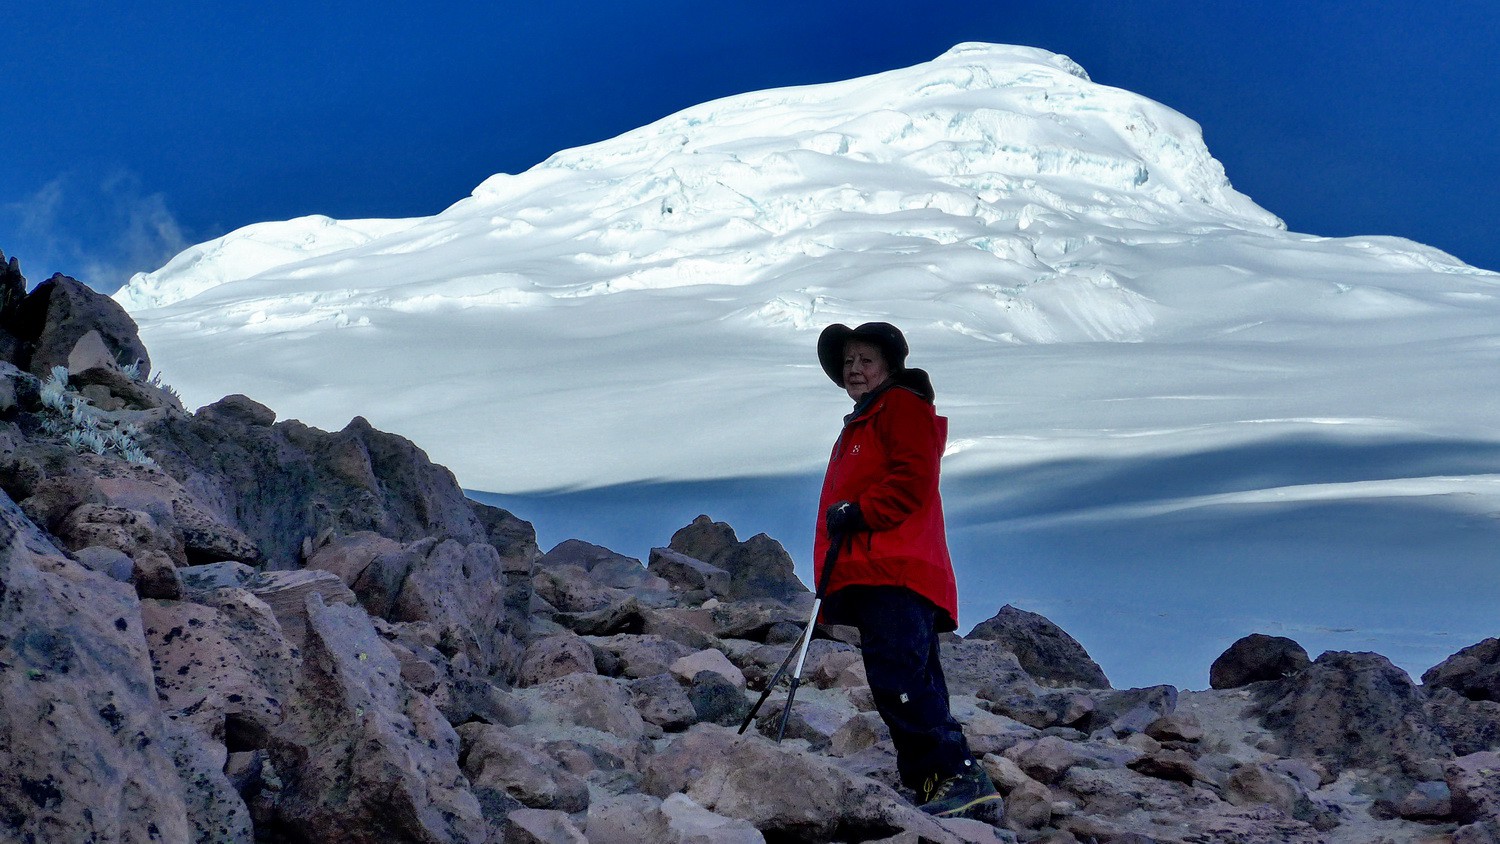 Marion with 5790 meters high Cayambe